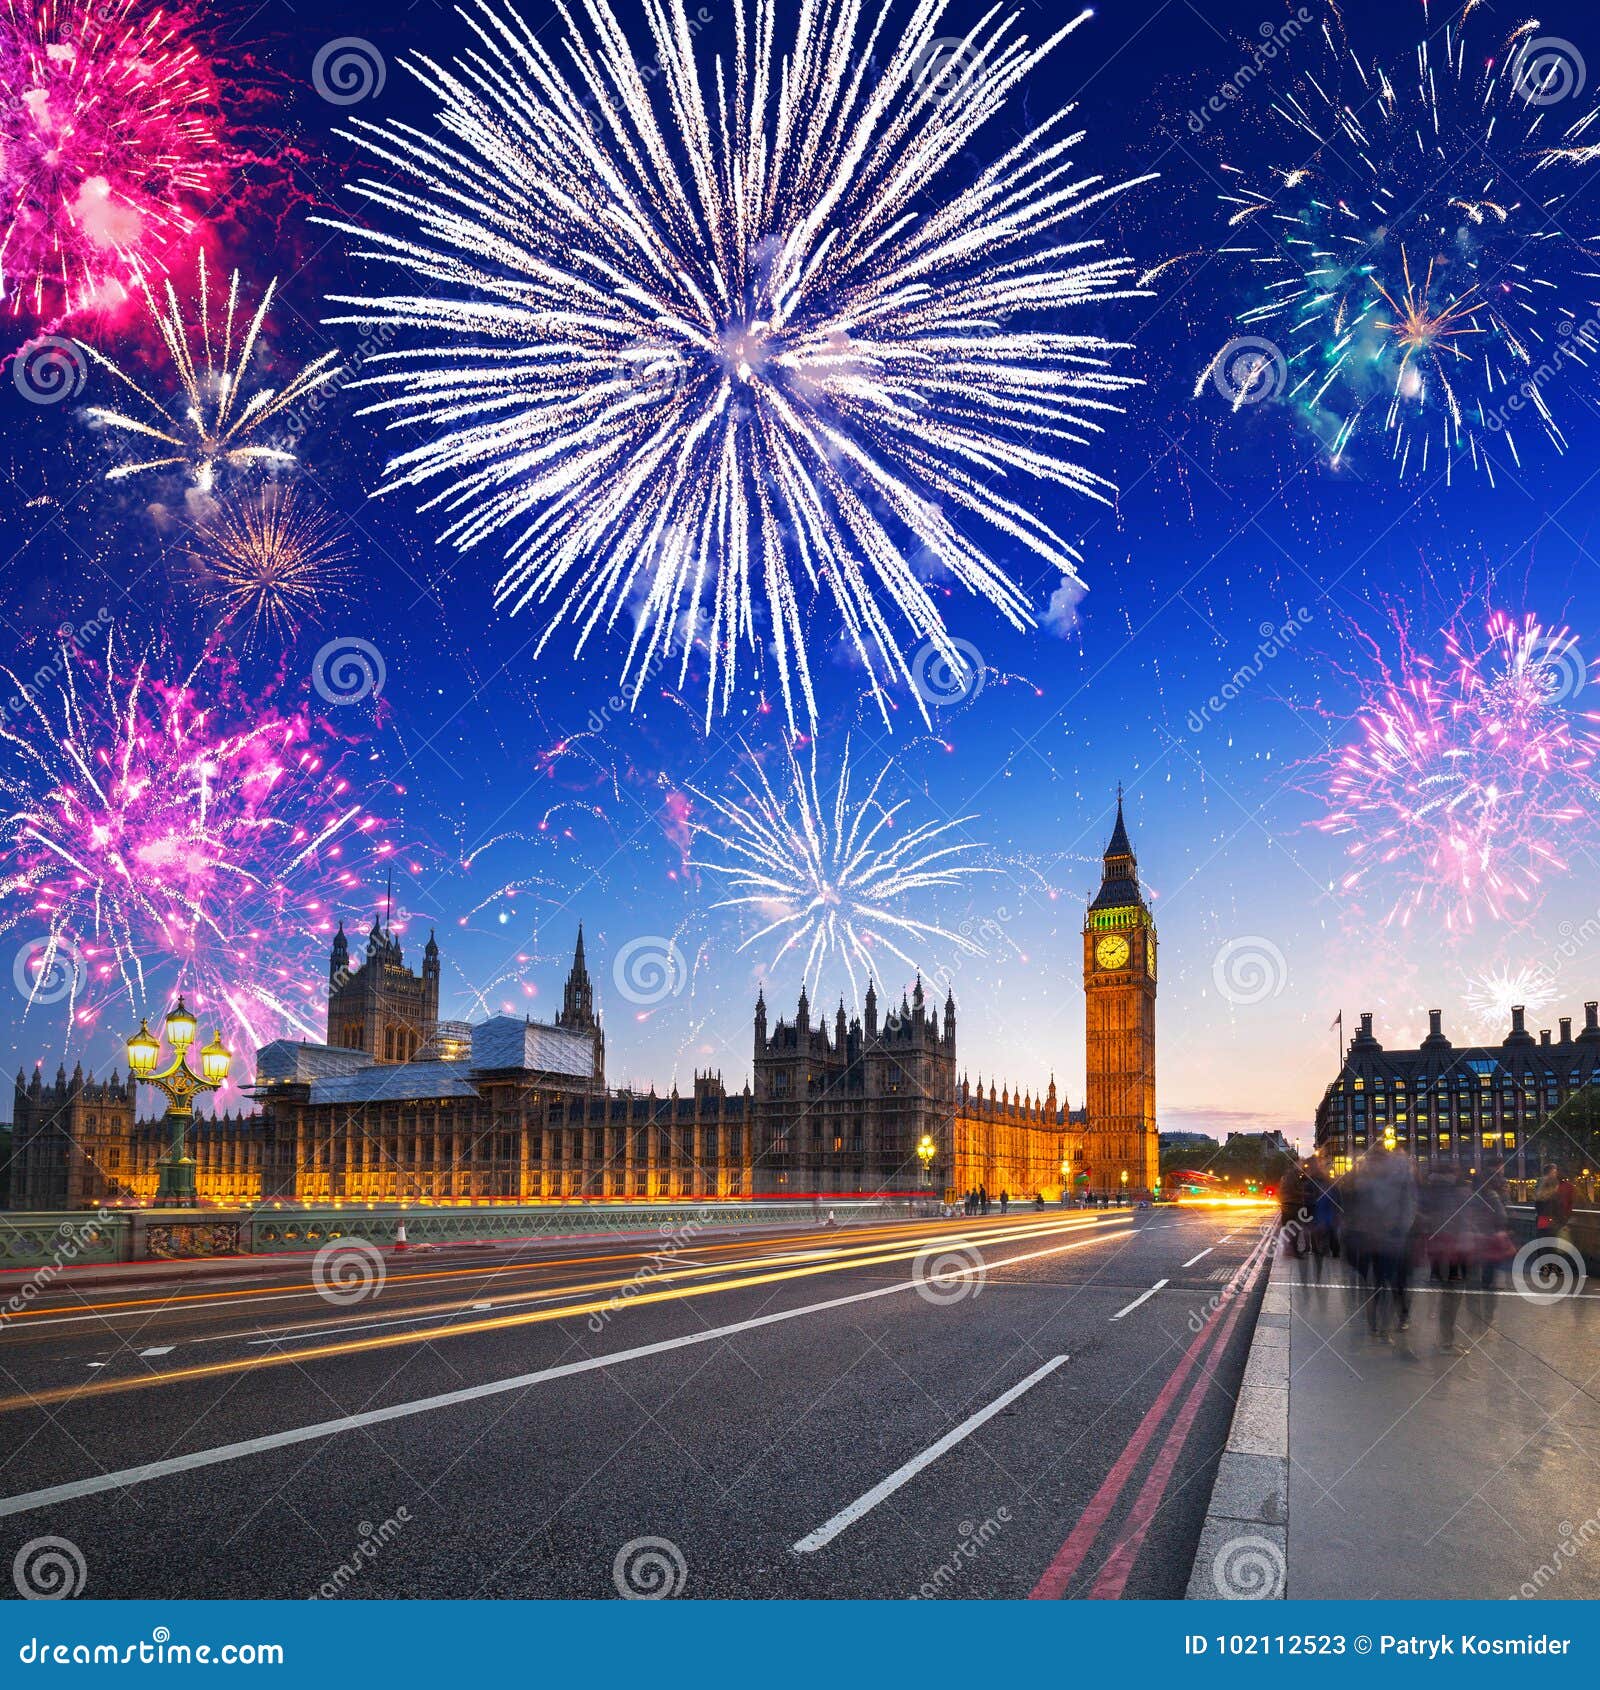 Fireworks Display Over the Big Ben, London Editorial Stock Photo